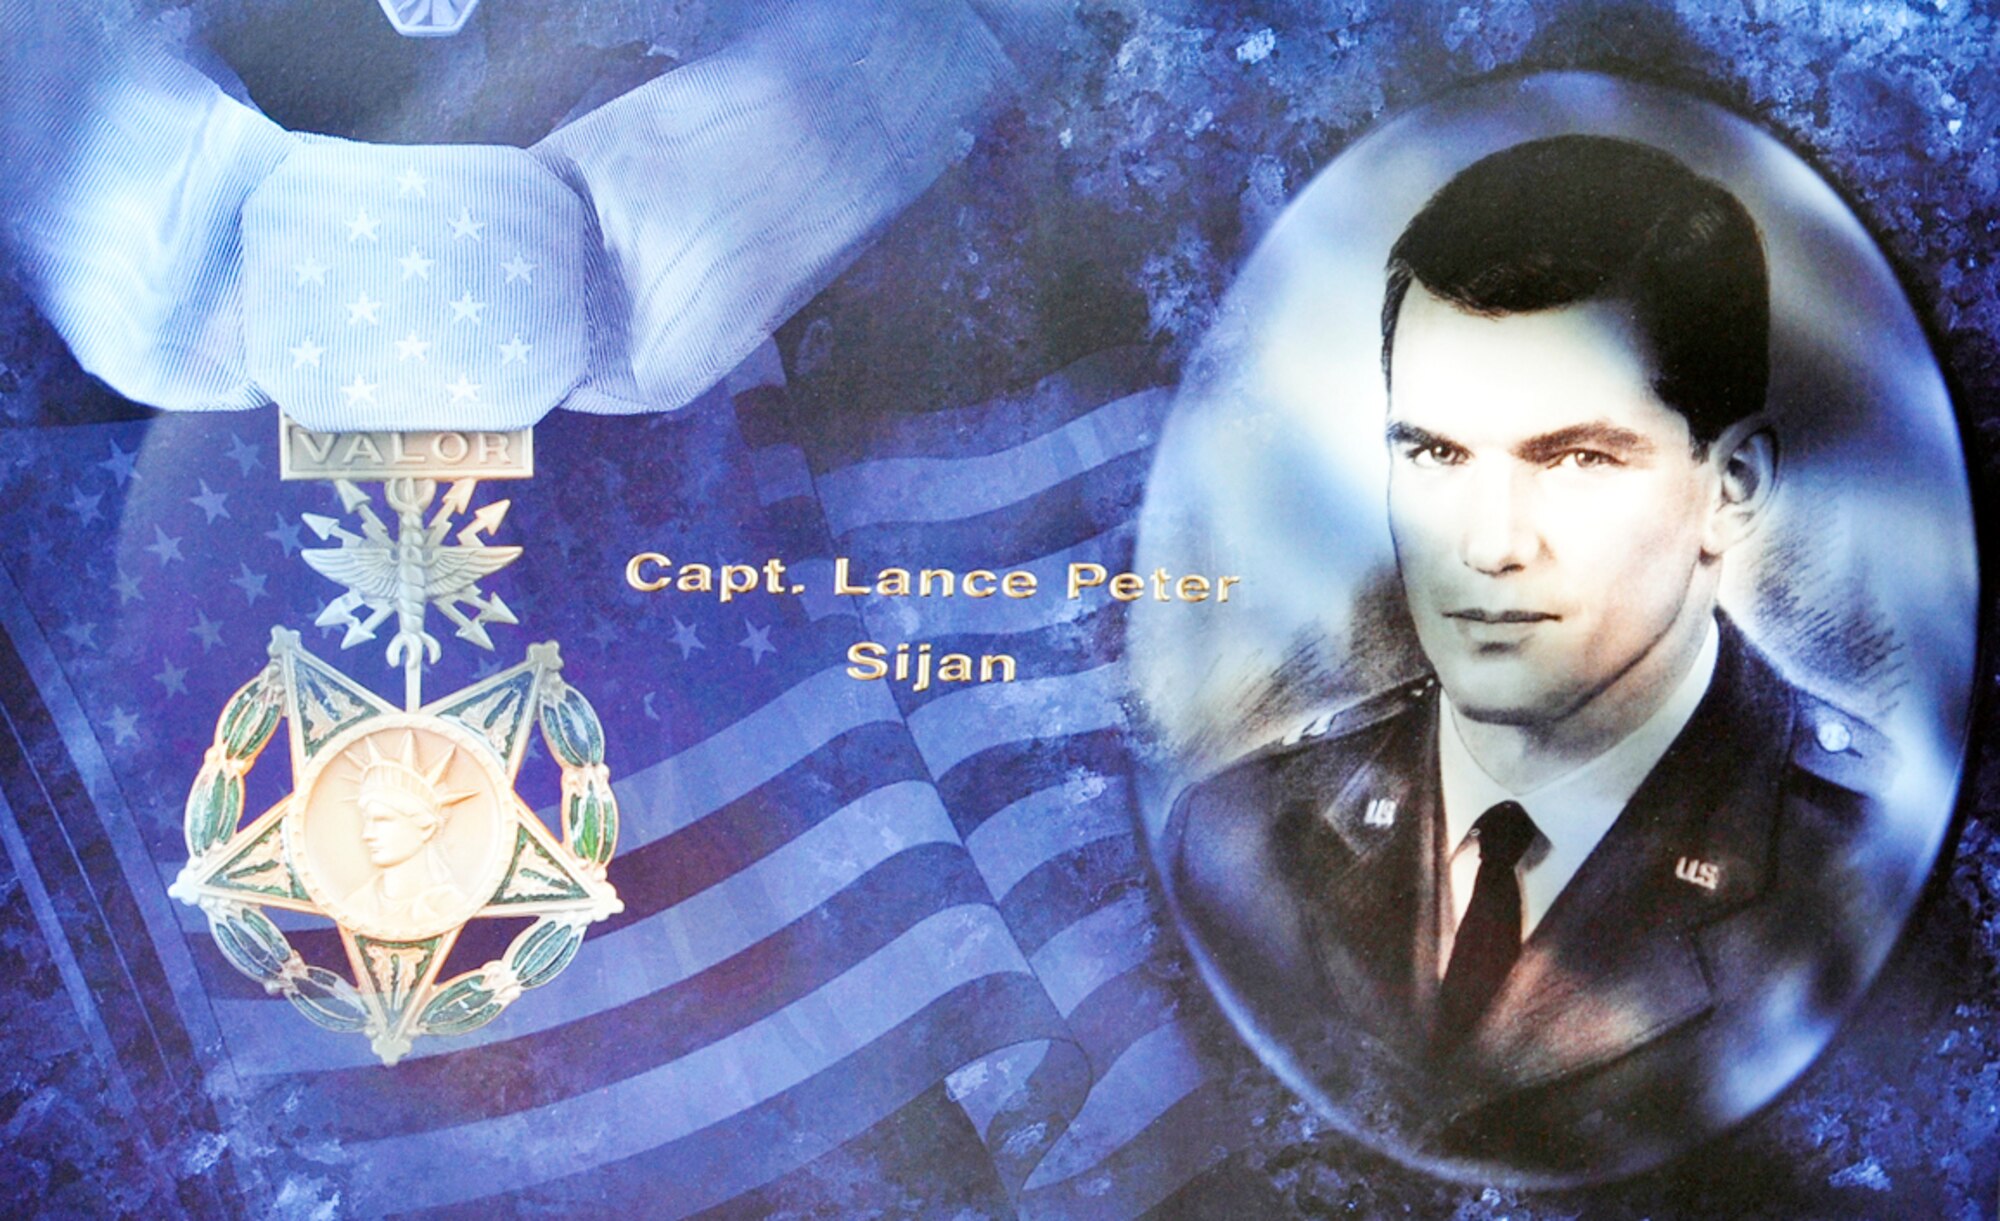 The annual Capt. Lance P. Sijan Award recognizes the accomplishments of officers and enlisted members who have demonstrated the highest qualities of leadership in the performance of their duties and the conduct of their lives. (U.S. Air Force photo illustration)